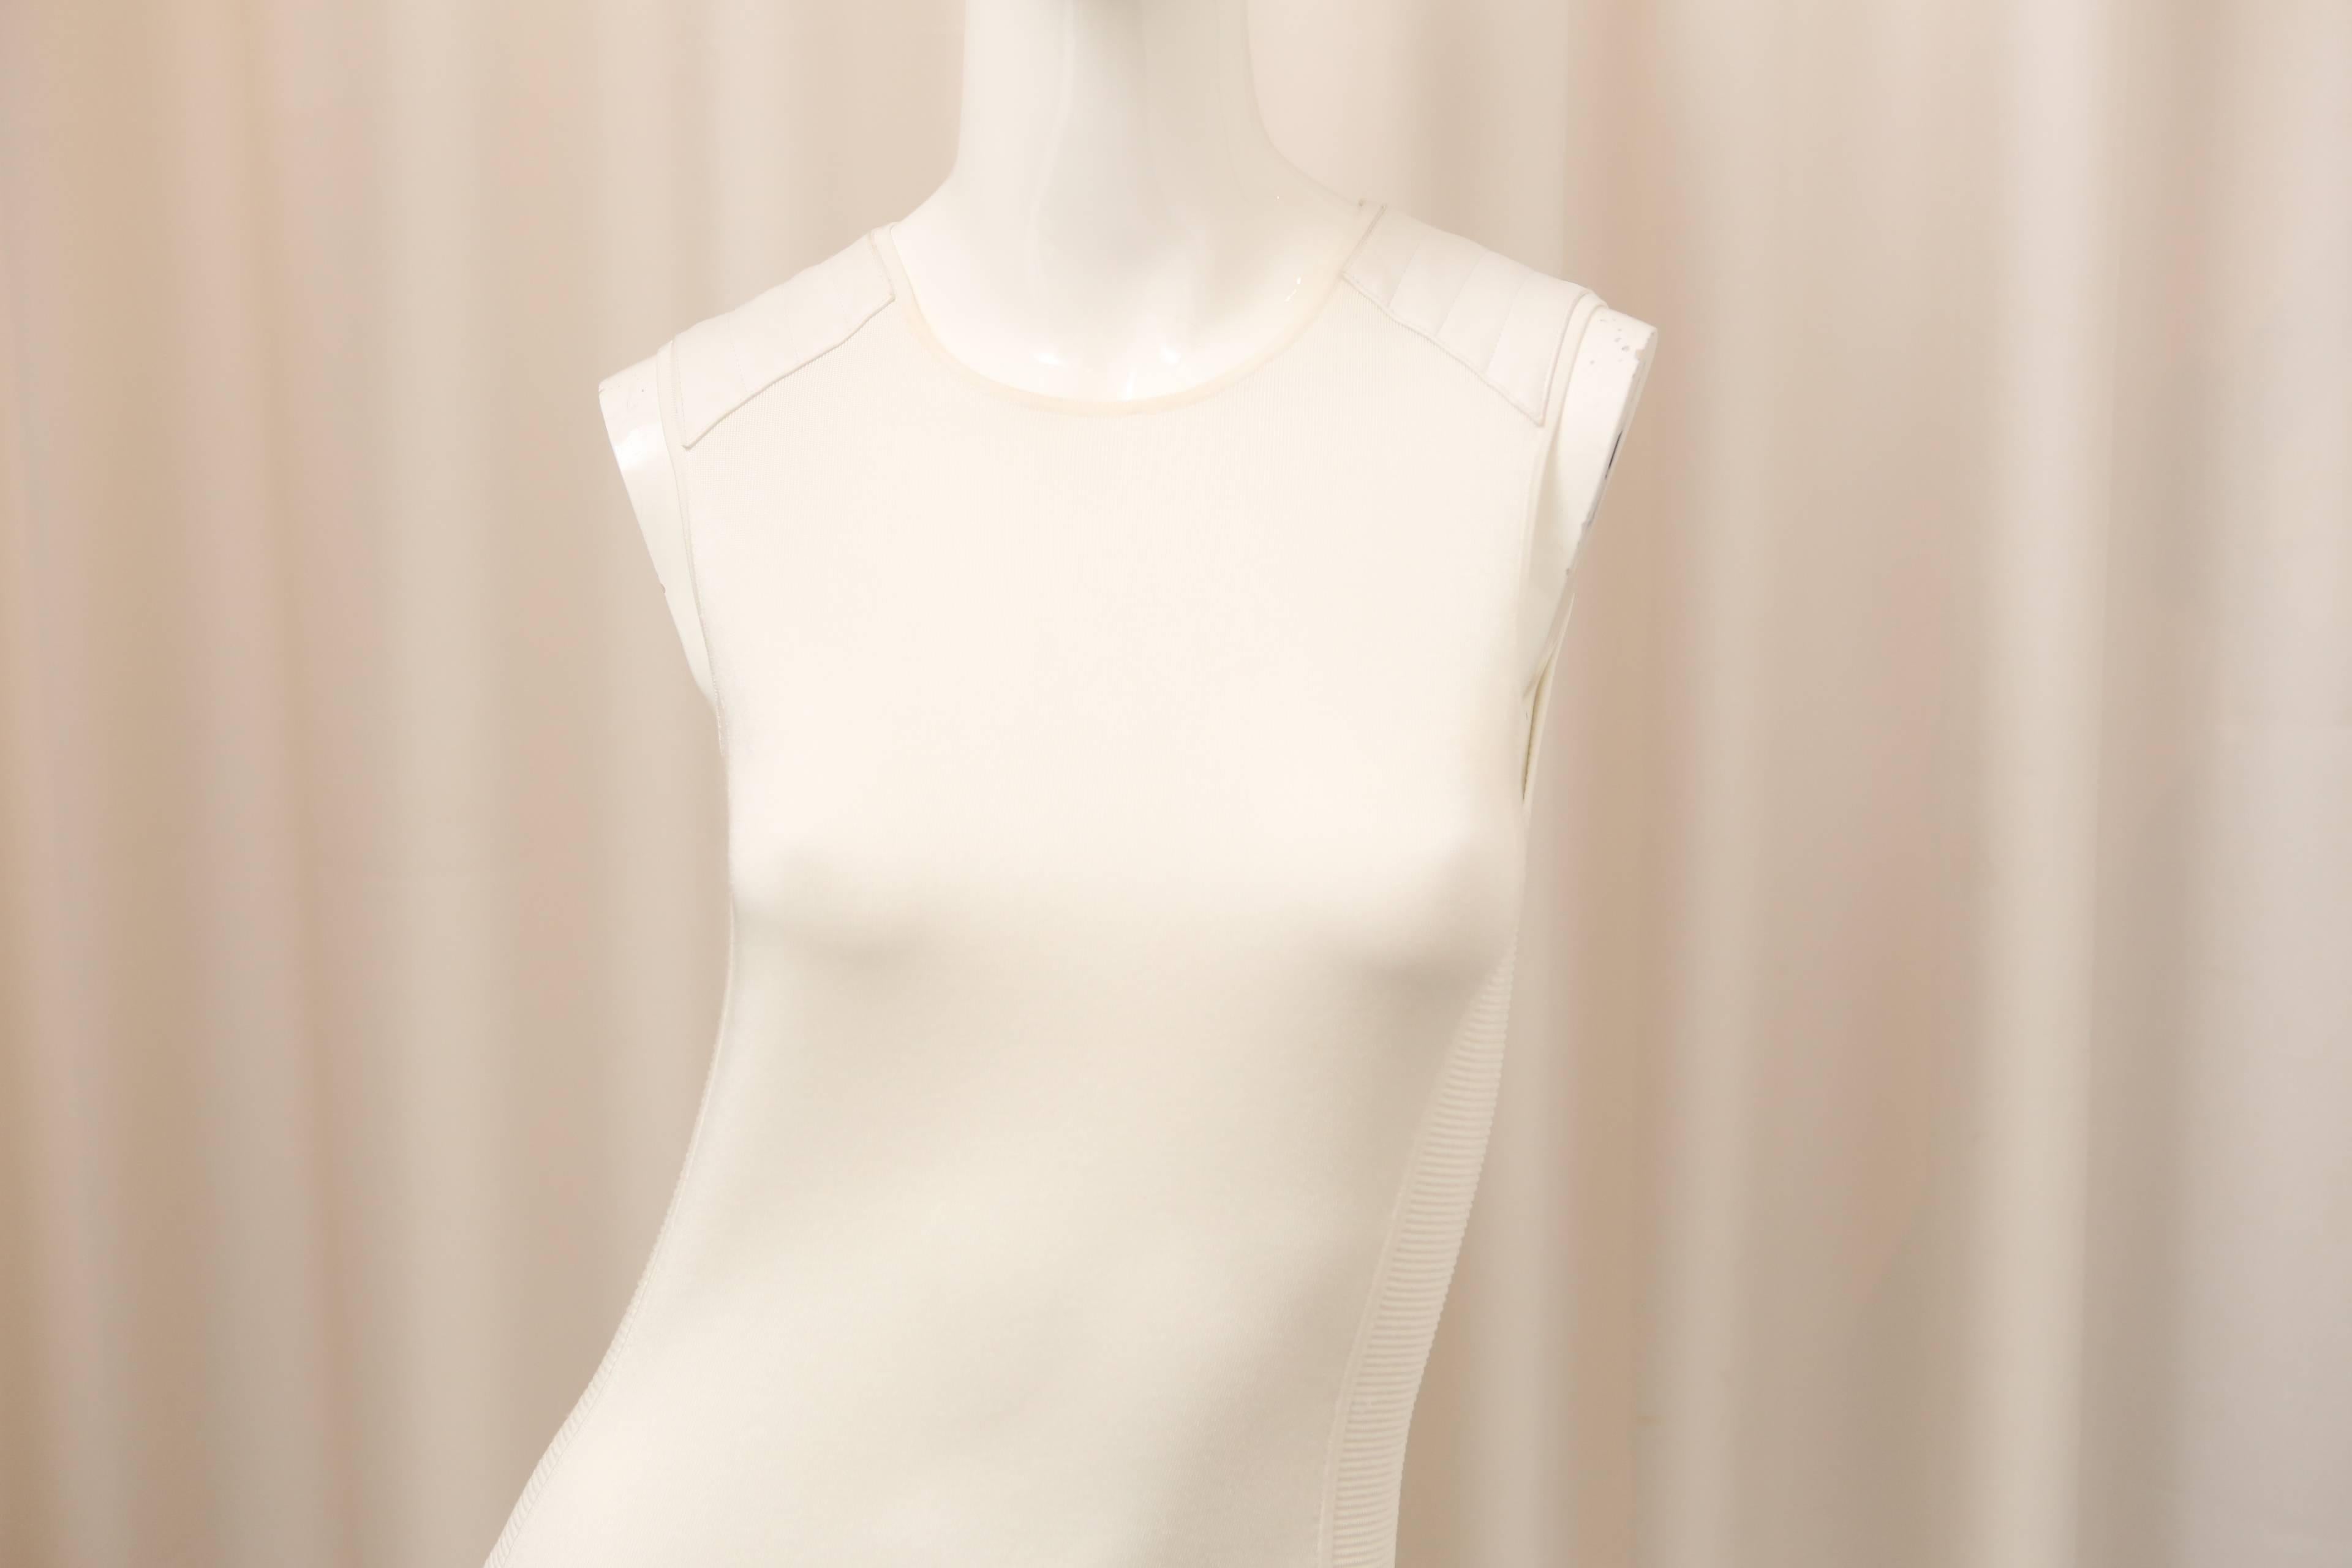 Ralph lauren Black Label ivory sleeveless dress with ribbing on the sides and ivory leather patches at shoulder.  